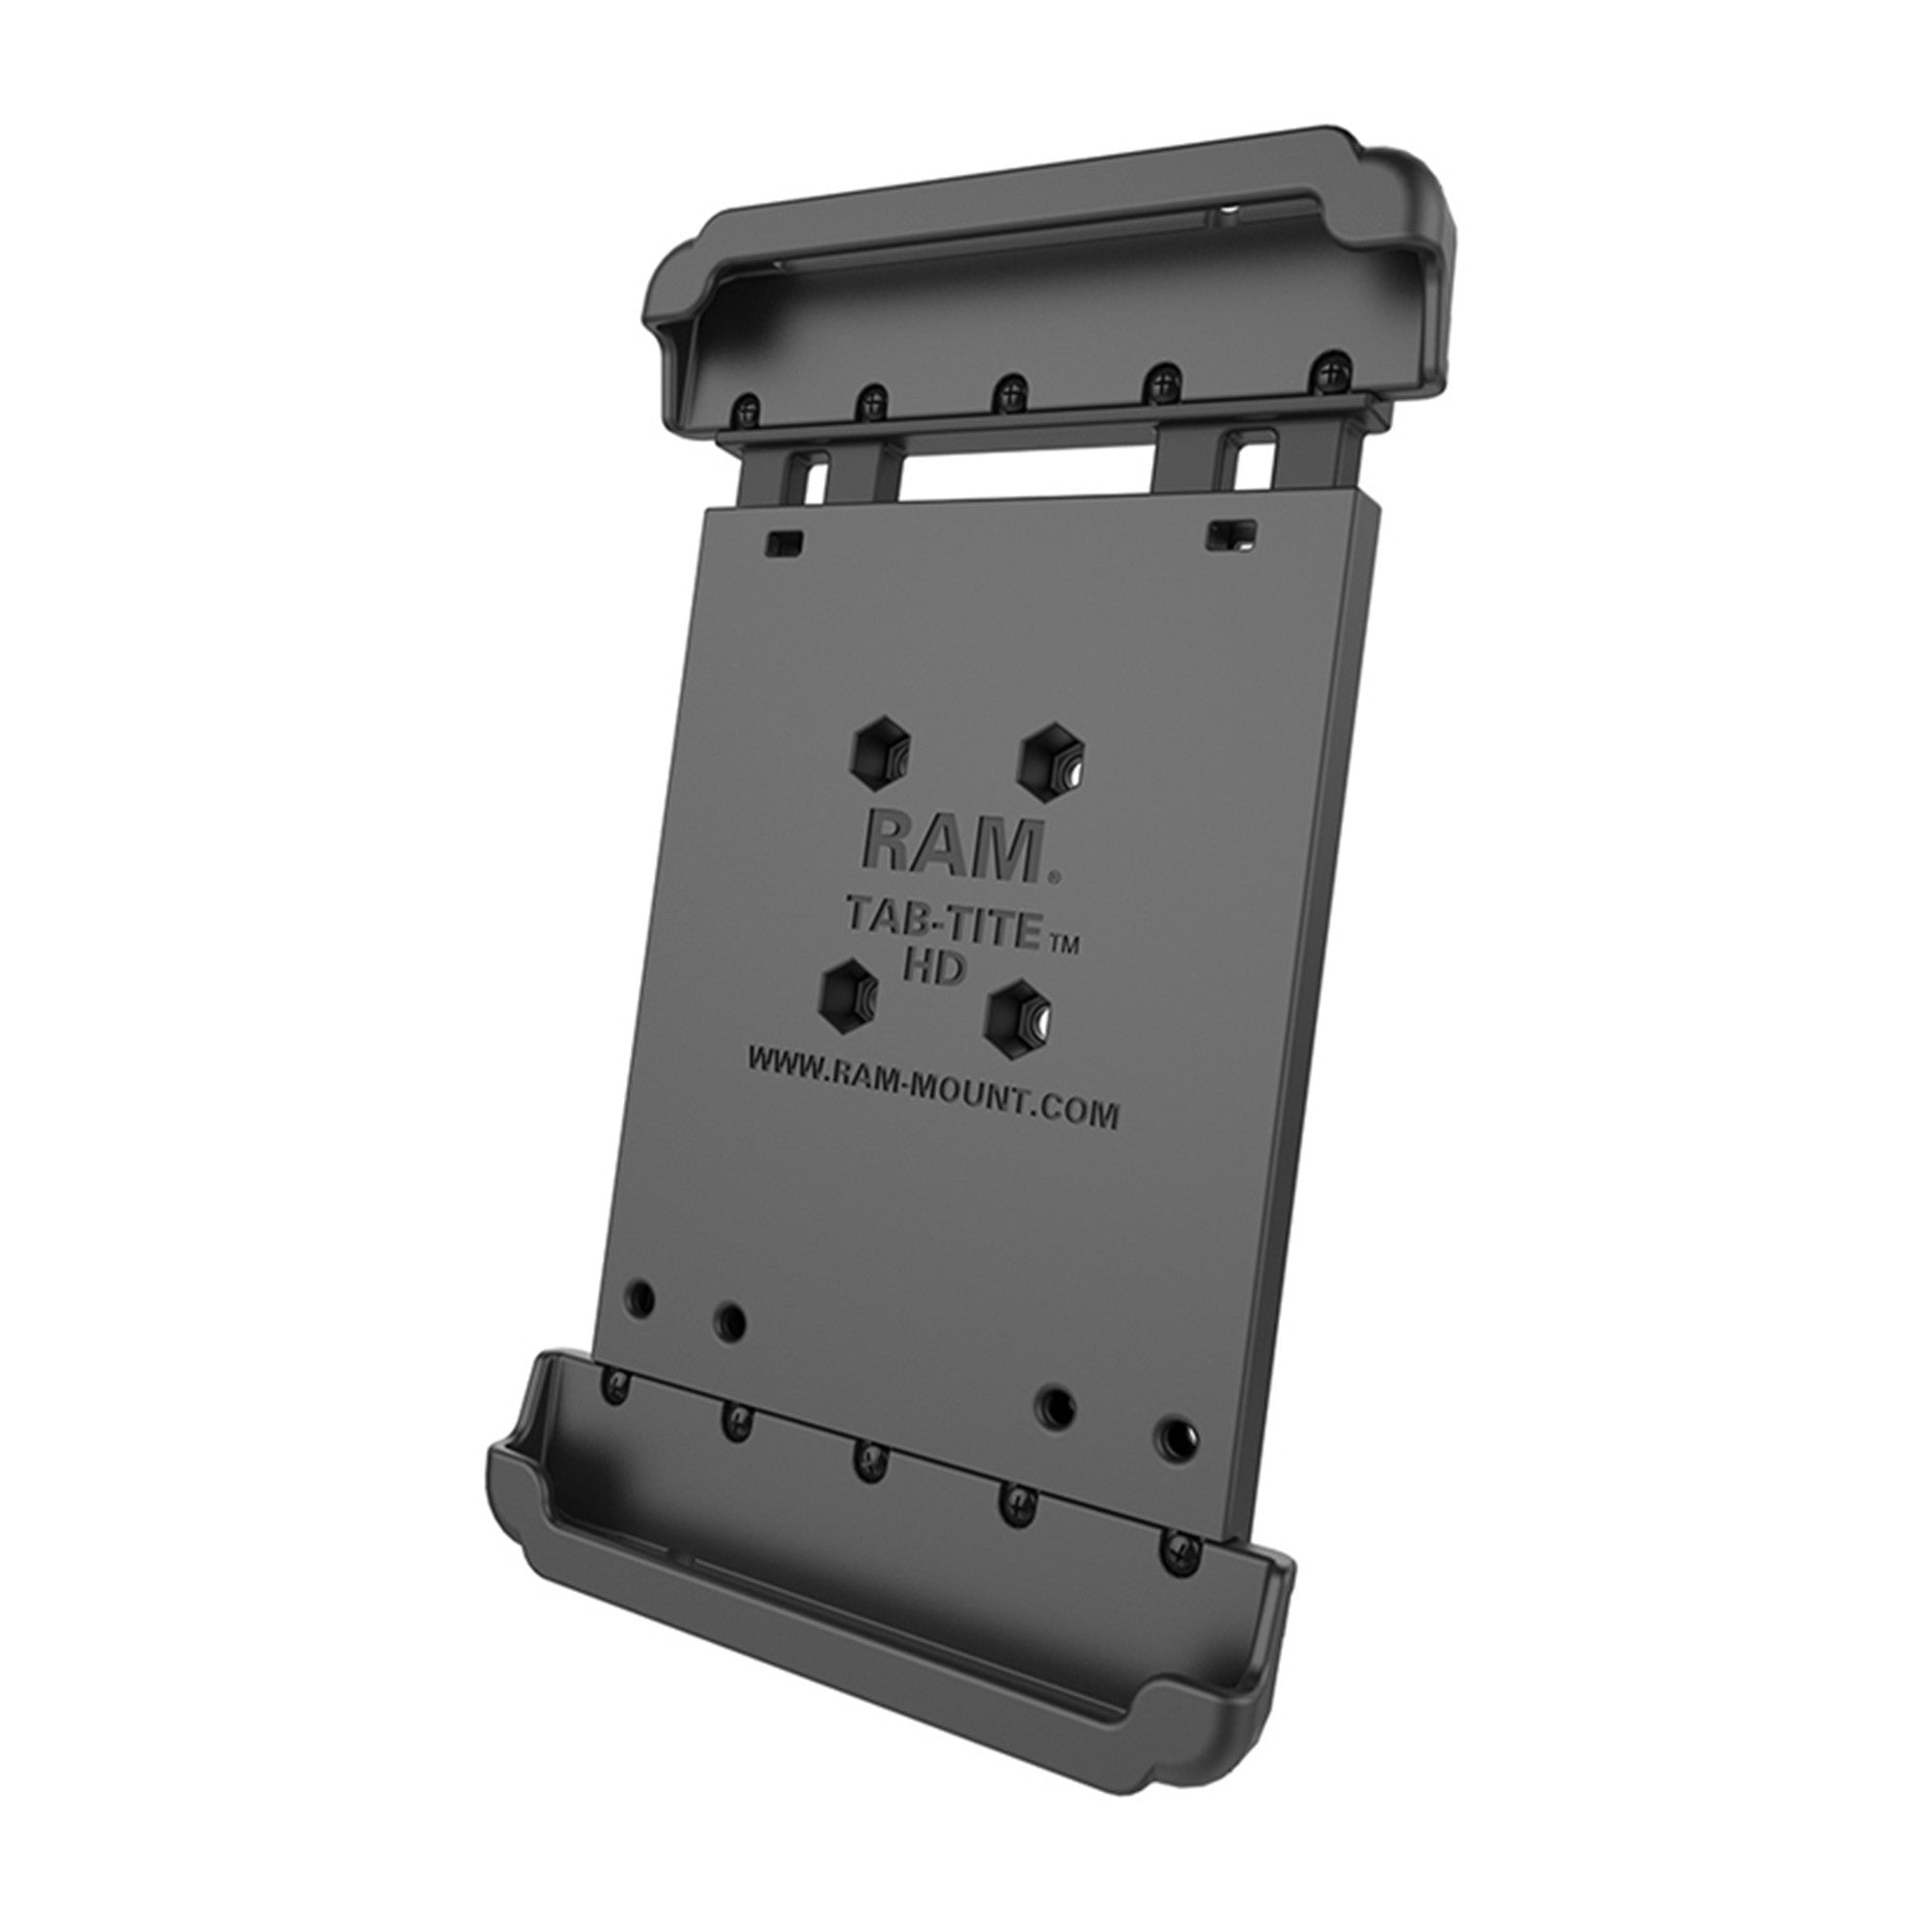 RAM Tab-Tite Spring Loaded Holder for 8" Tablets - B or C Size